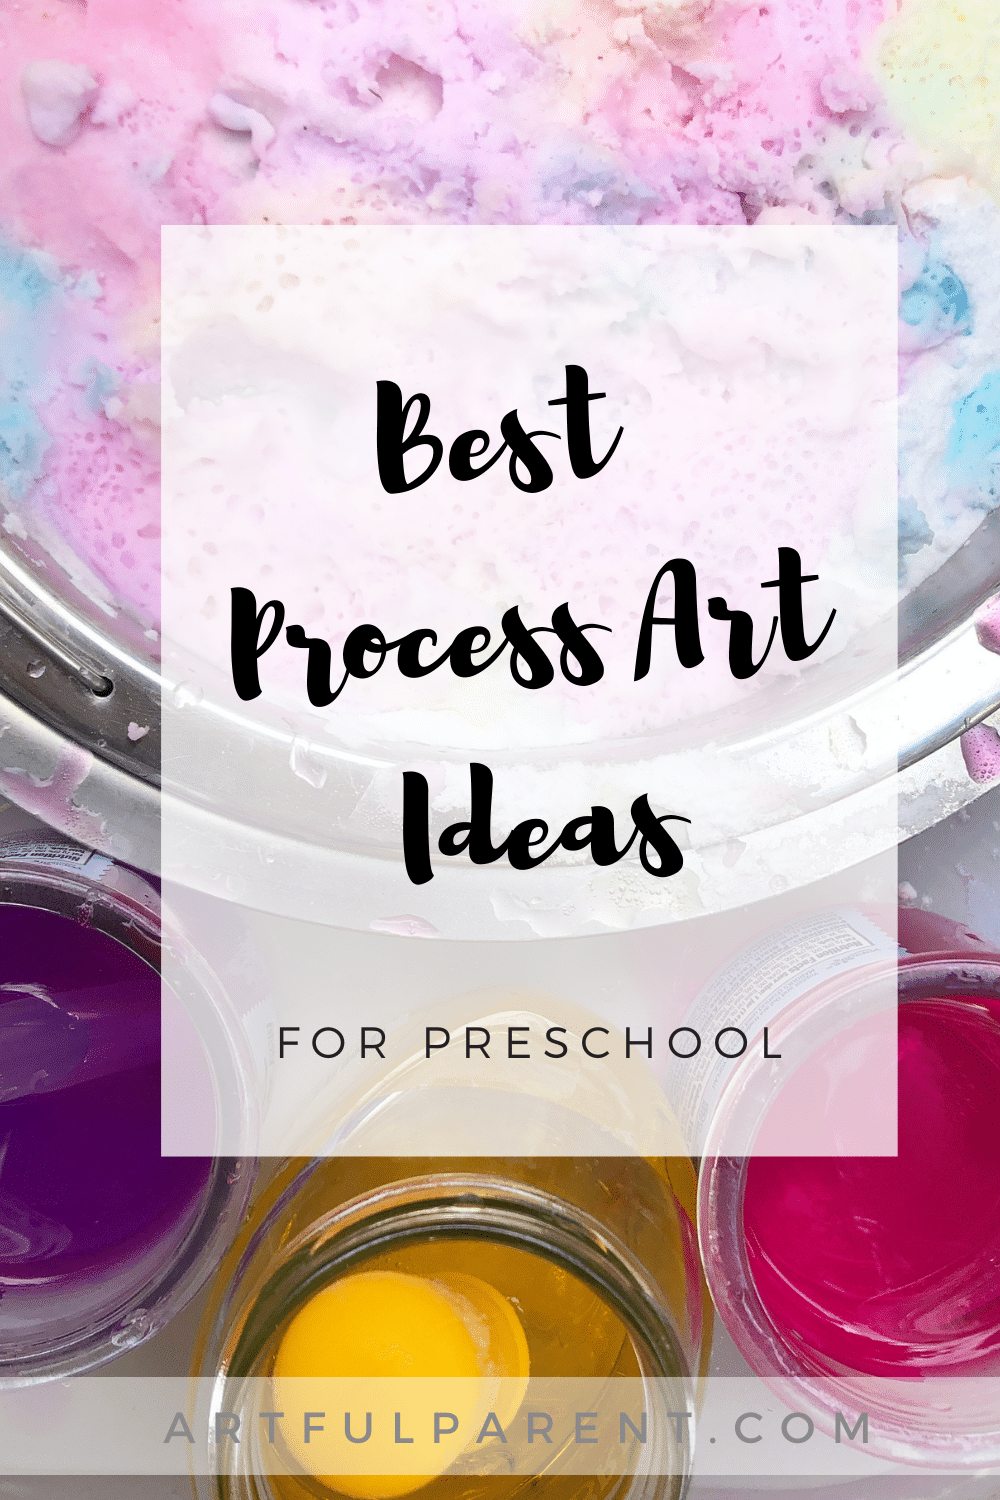 10 Arts and Crafts for Preschoolers